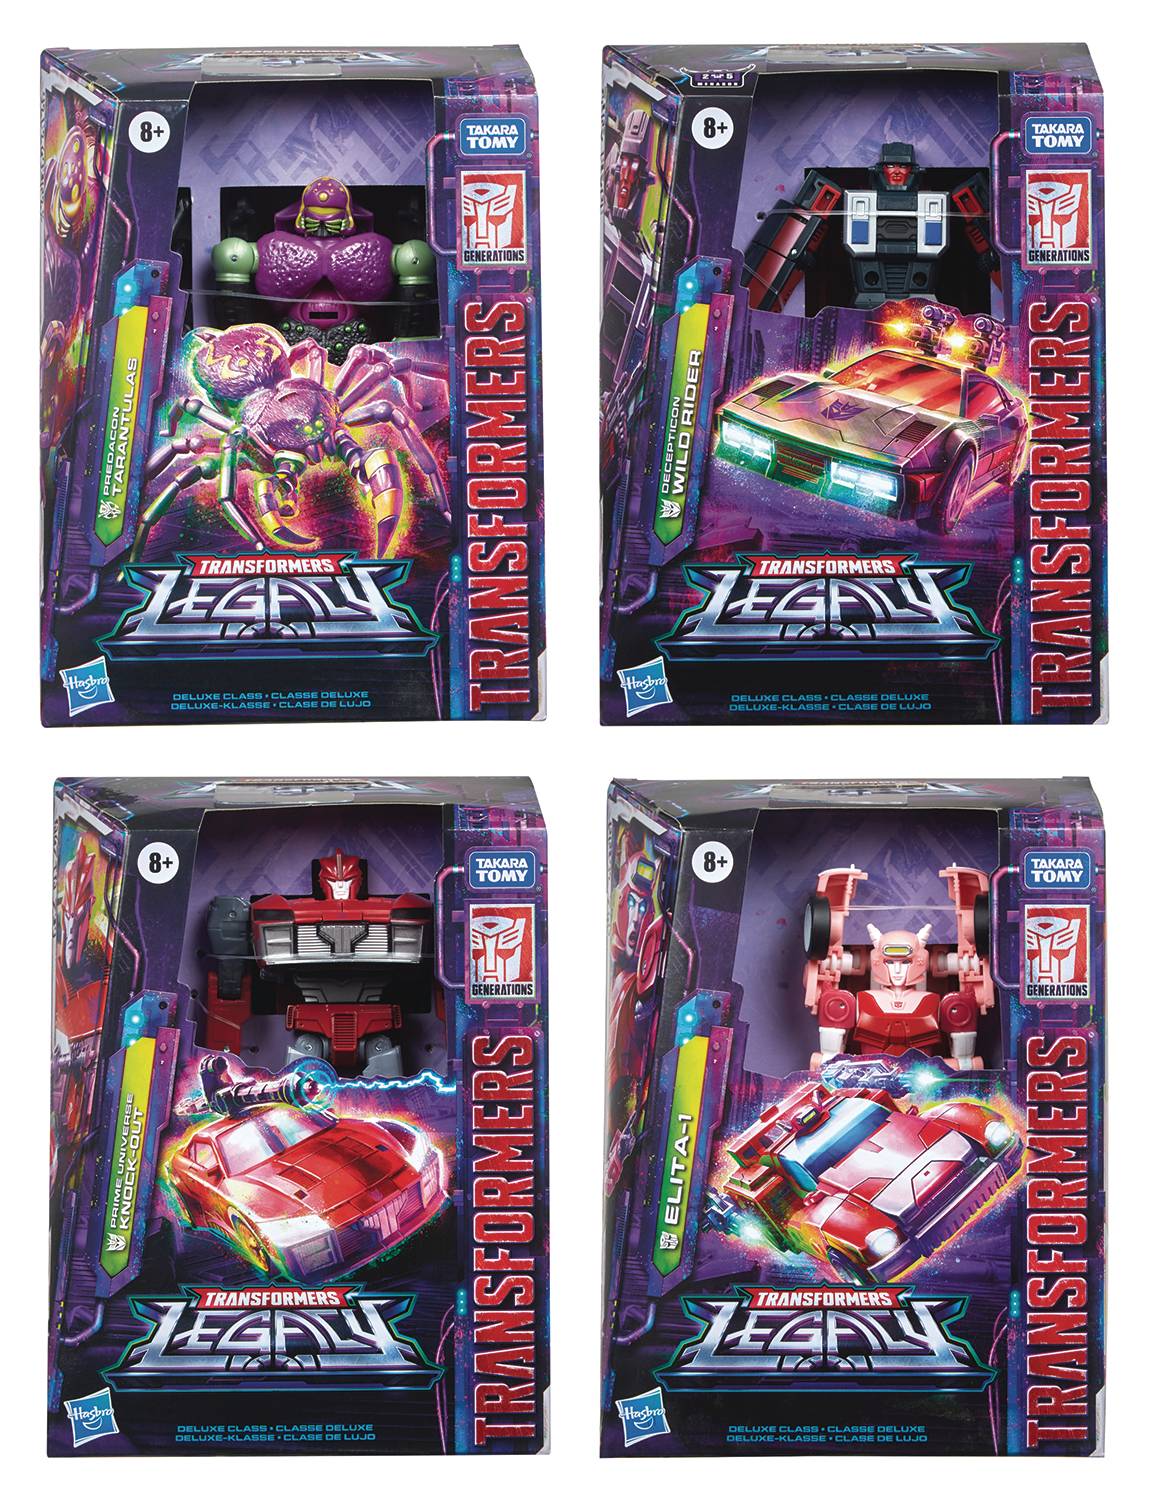 Transformers Legacy: Knock-Out by Hasbro